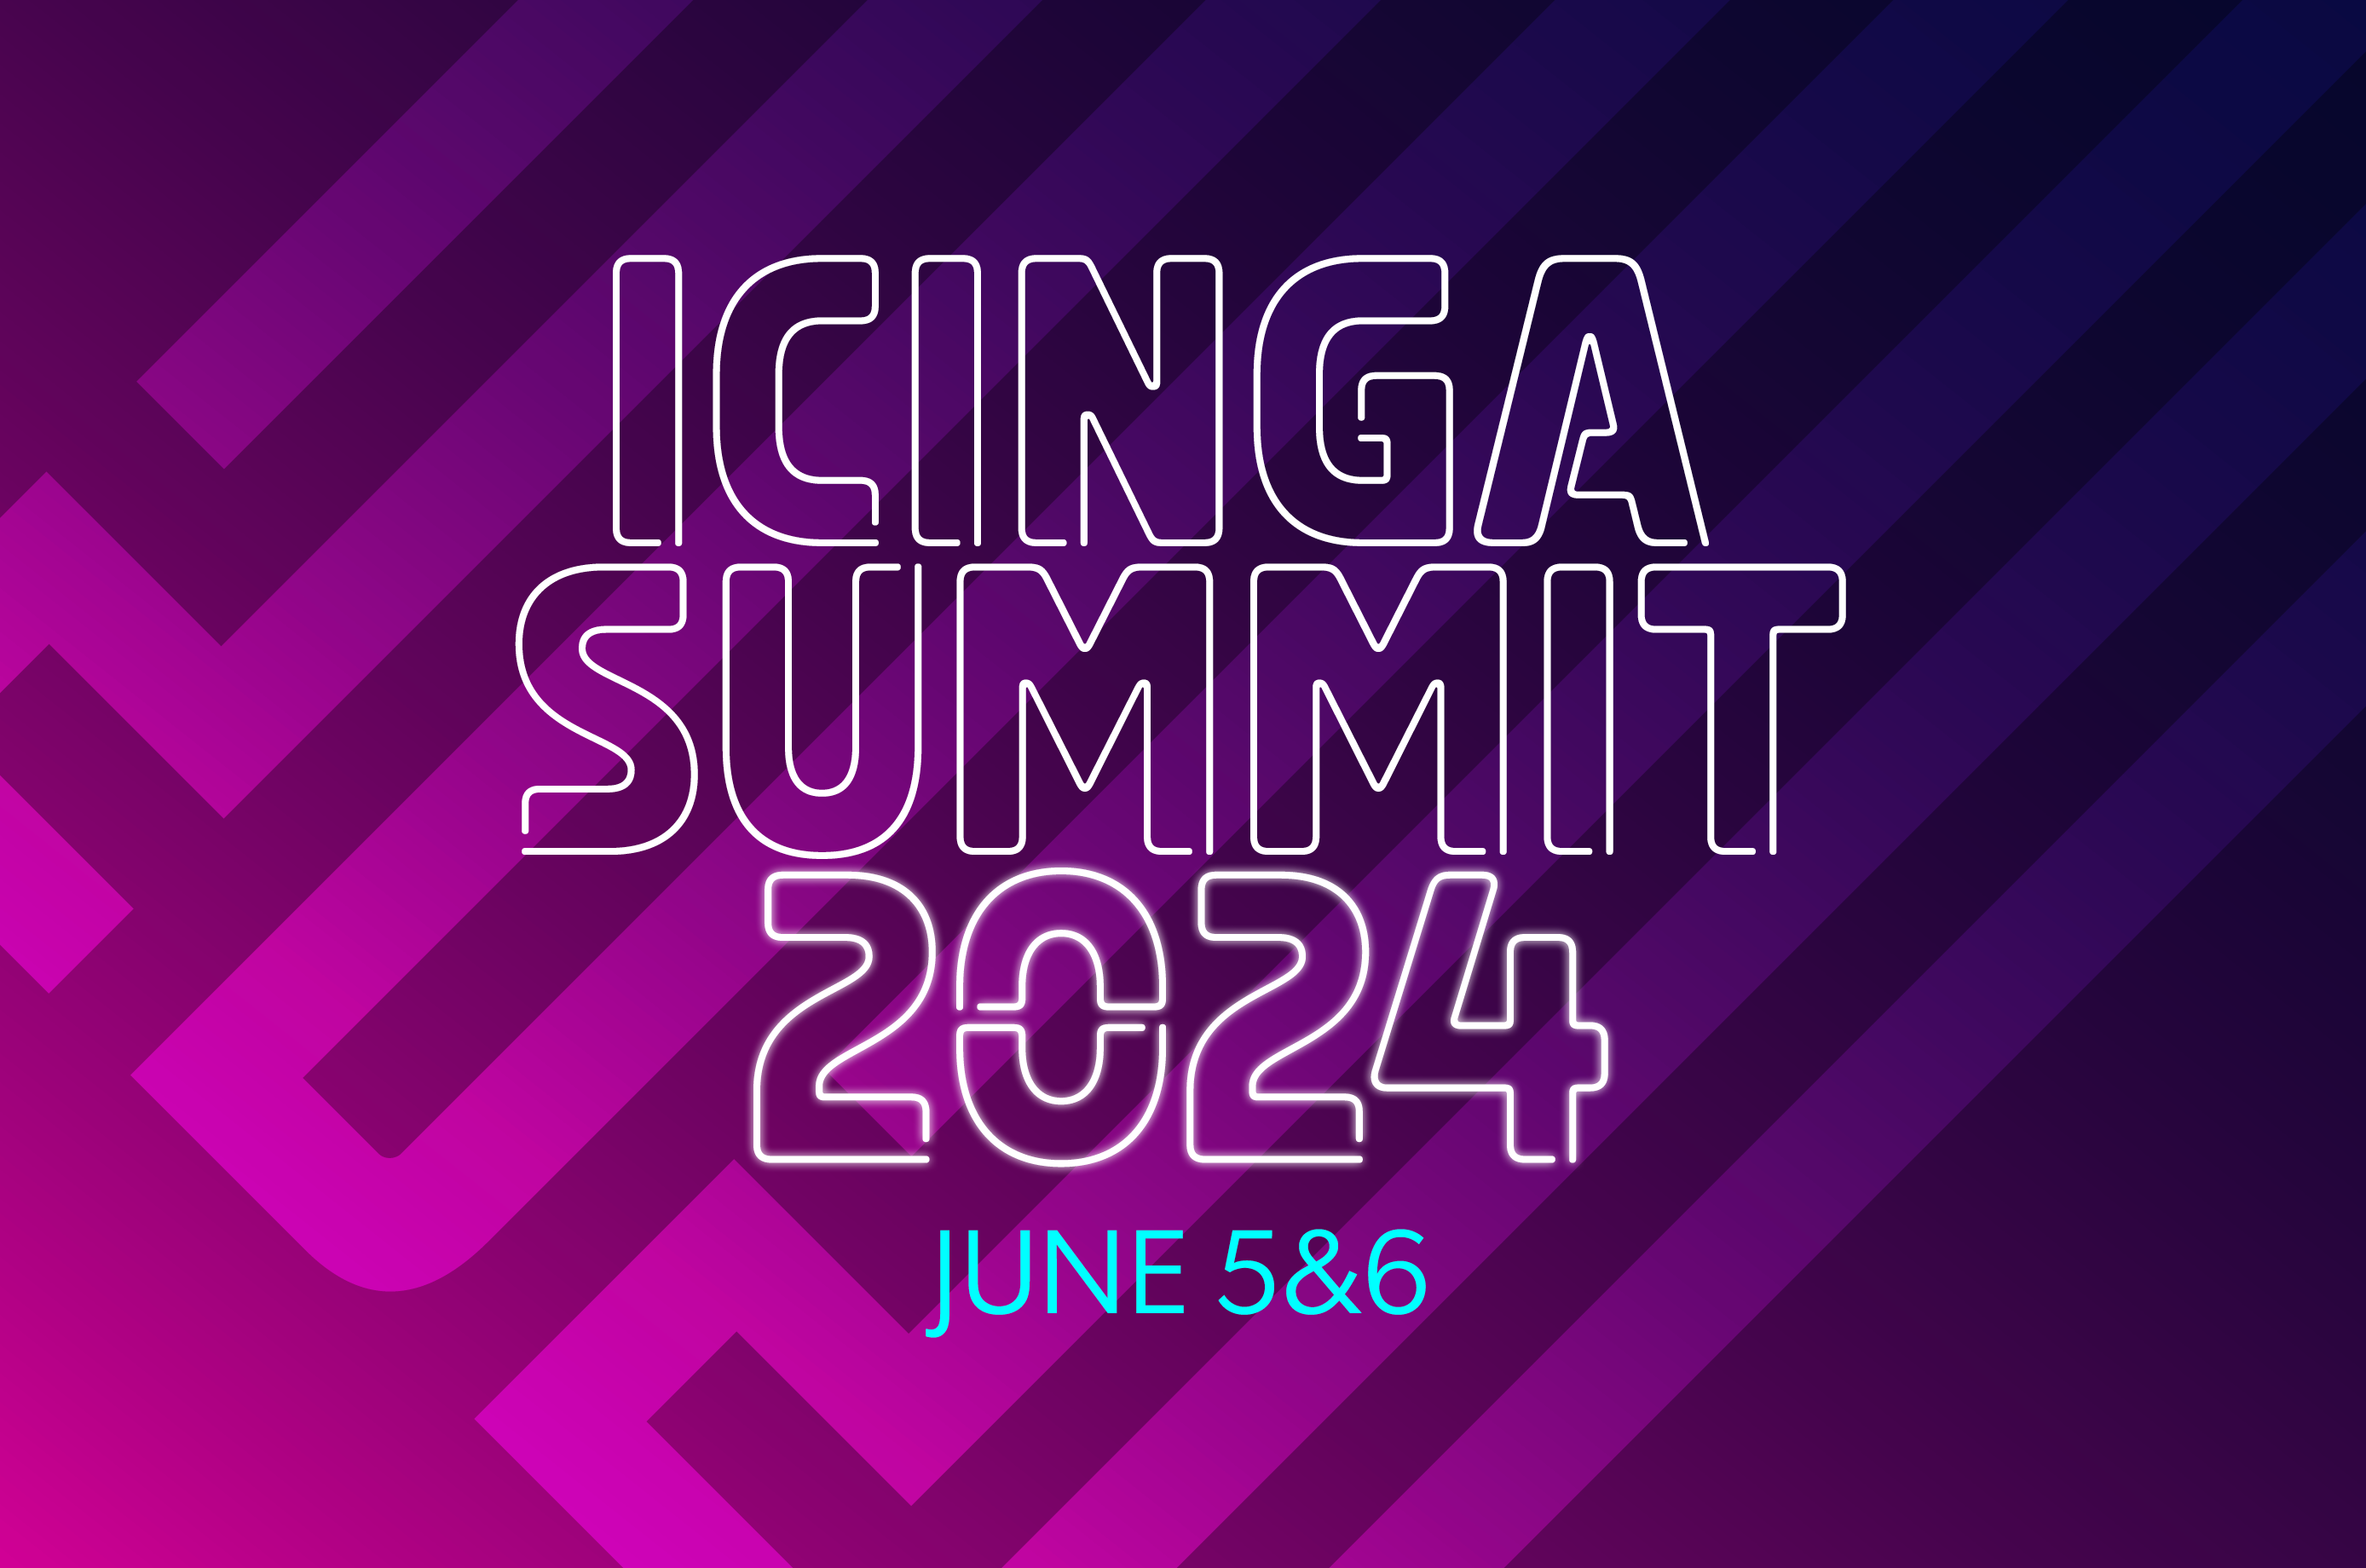 picture of a banner or logo from Icinga Summit 2024